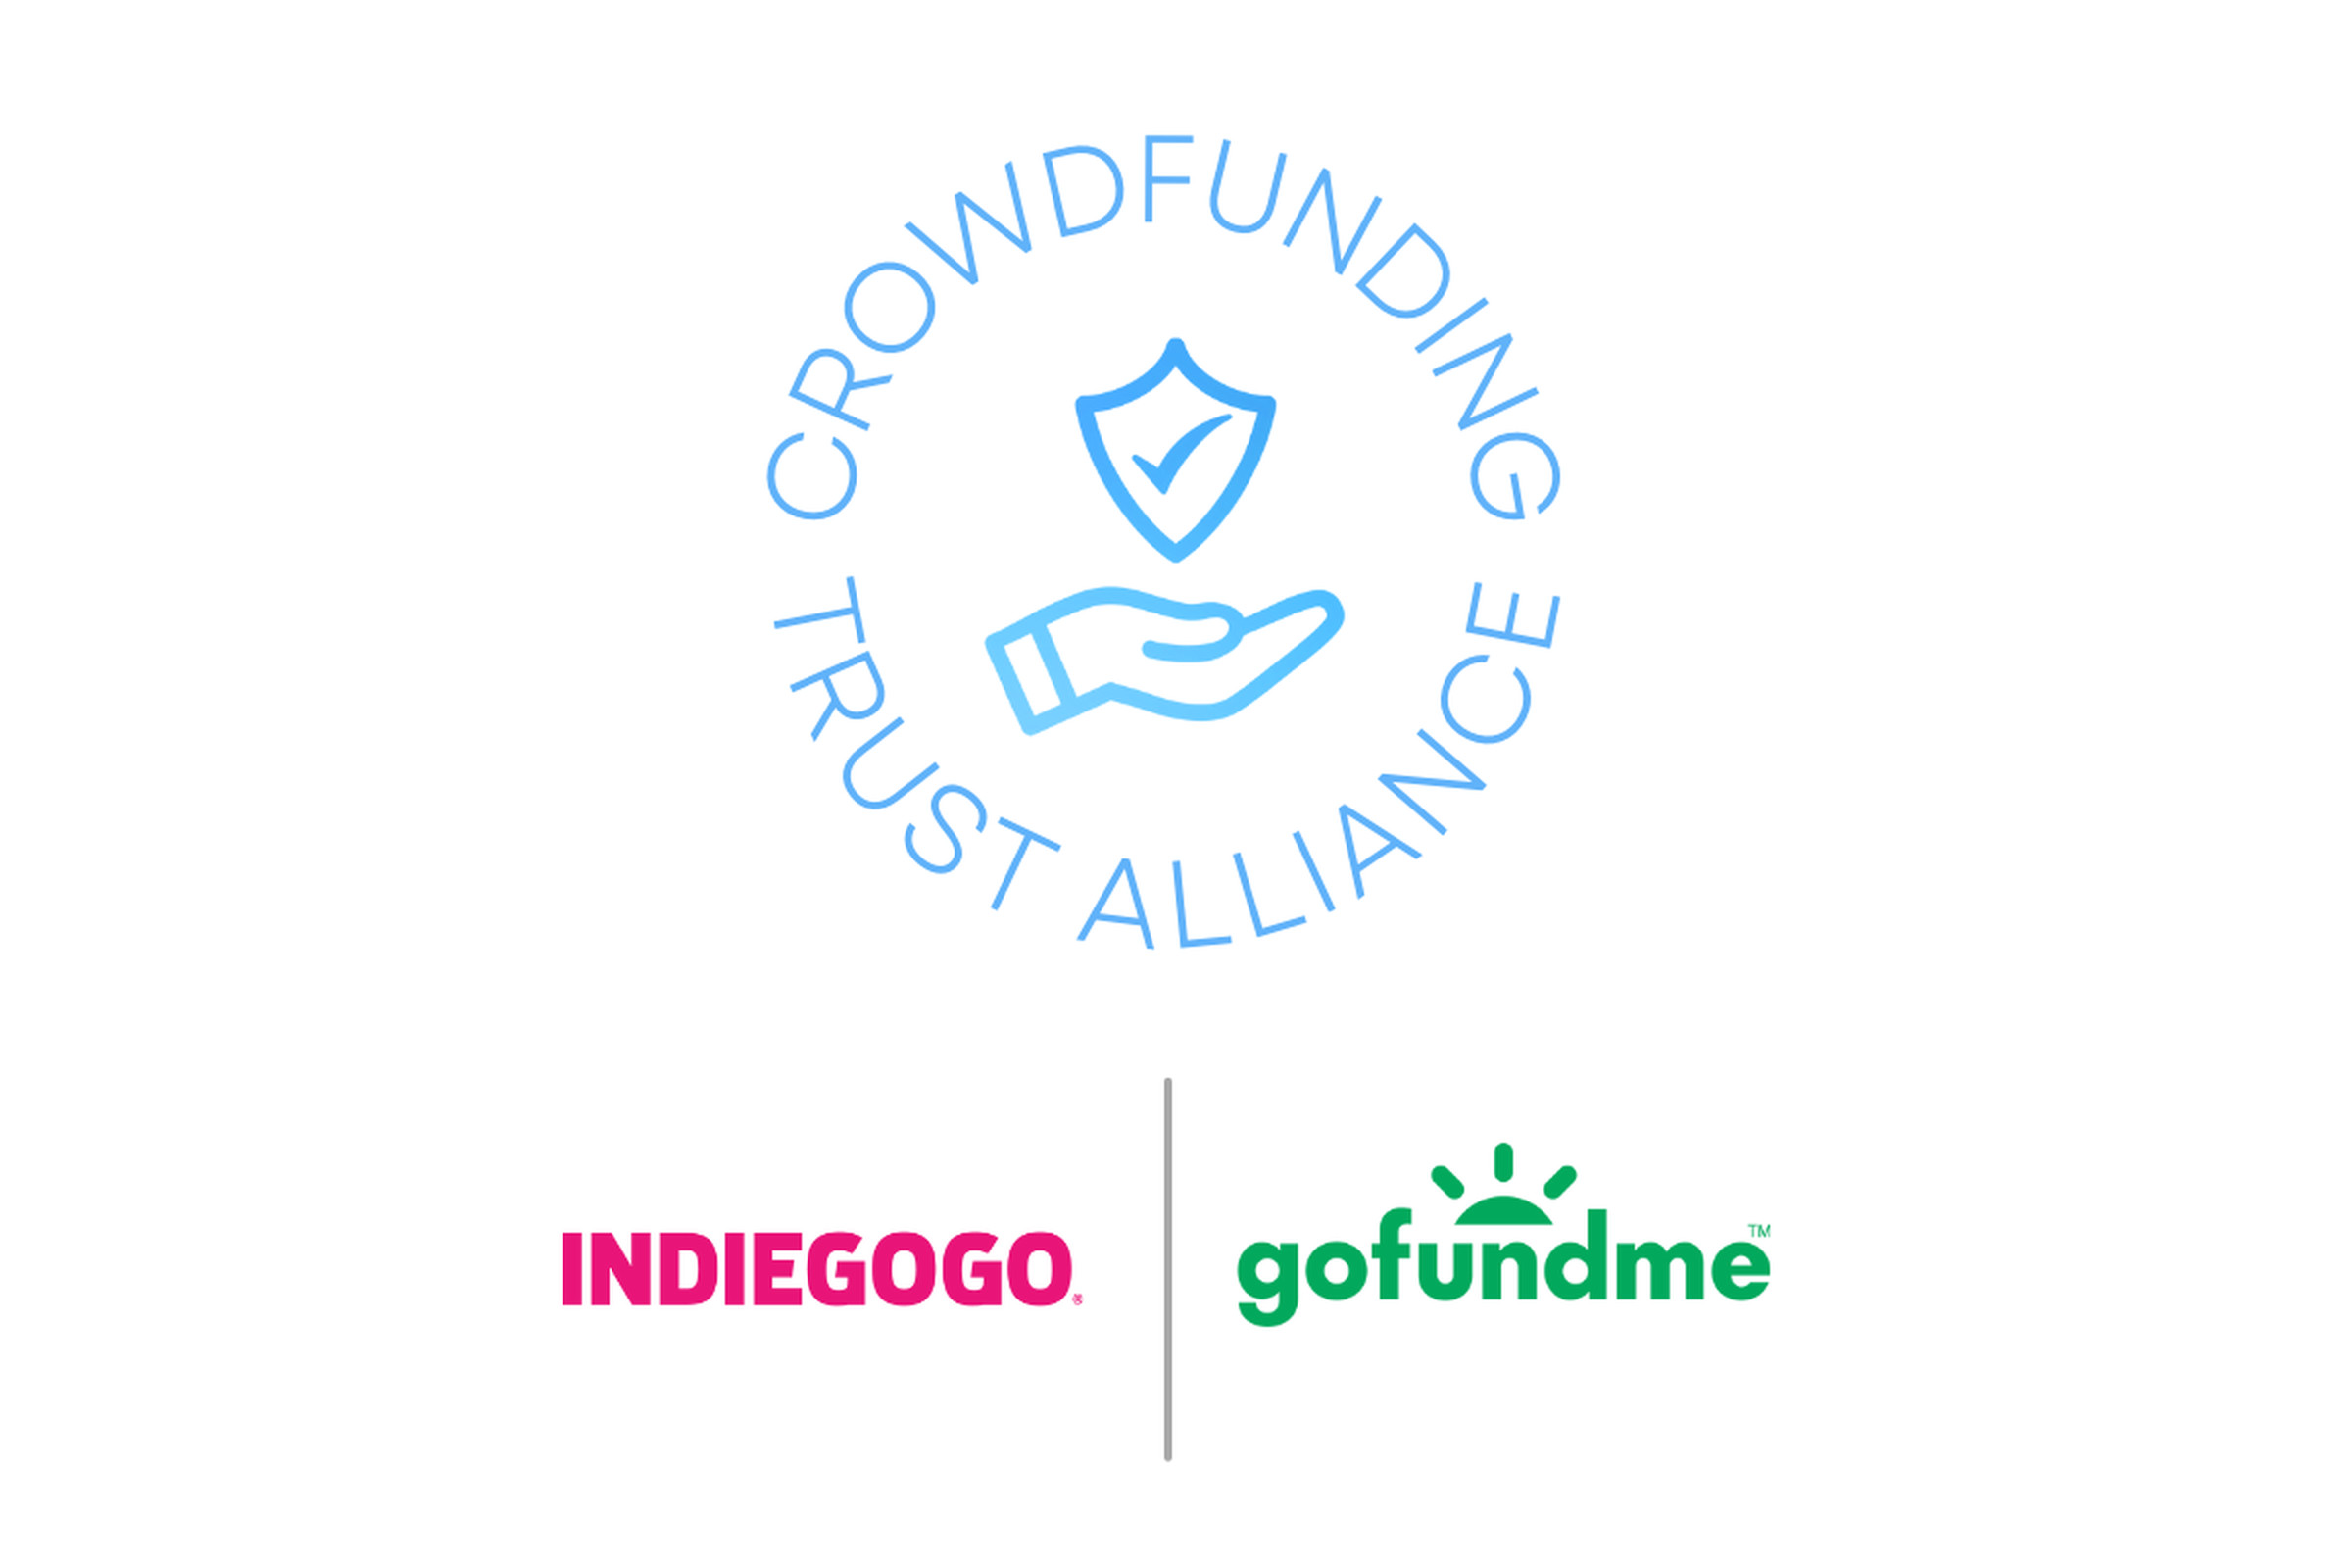 Logo of the Crowdfunding Trust Alliance, showing a hand with a shield and checkmark. The image lists Indiegogo and GoFundMe as members.